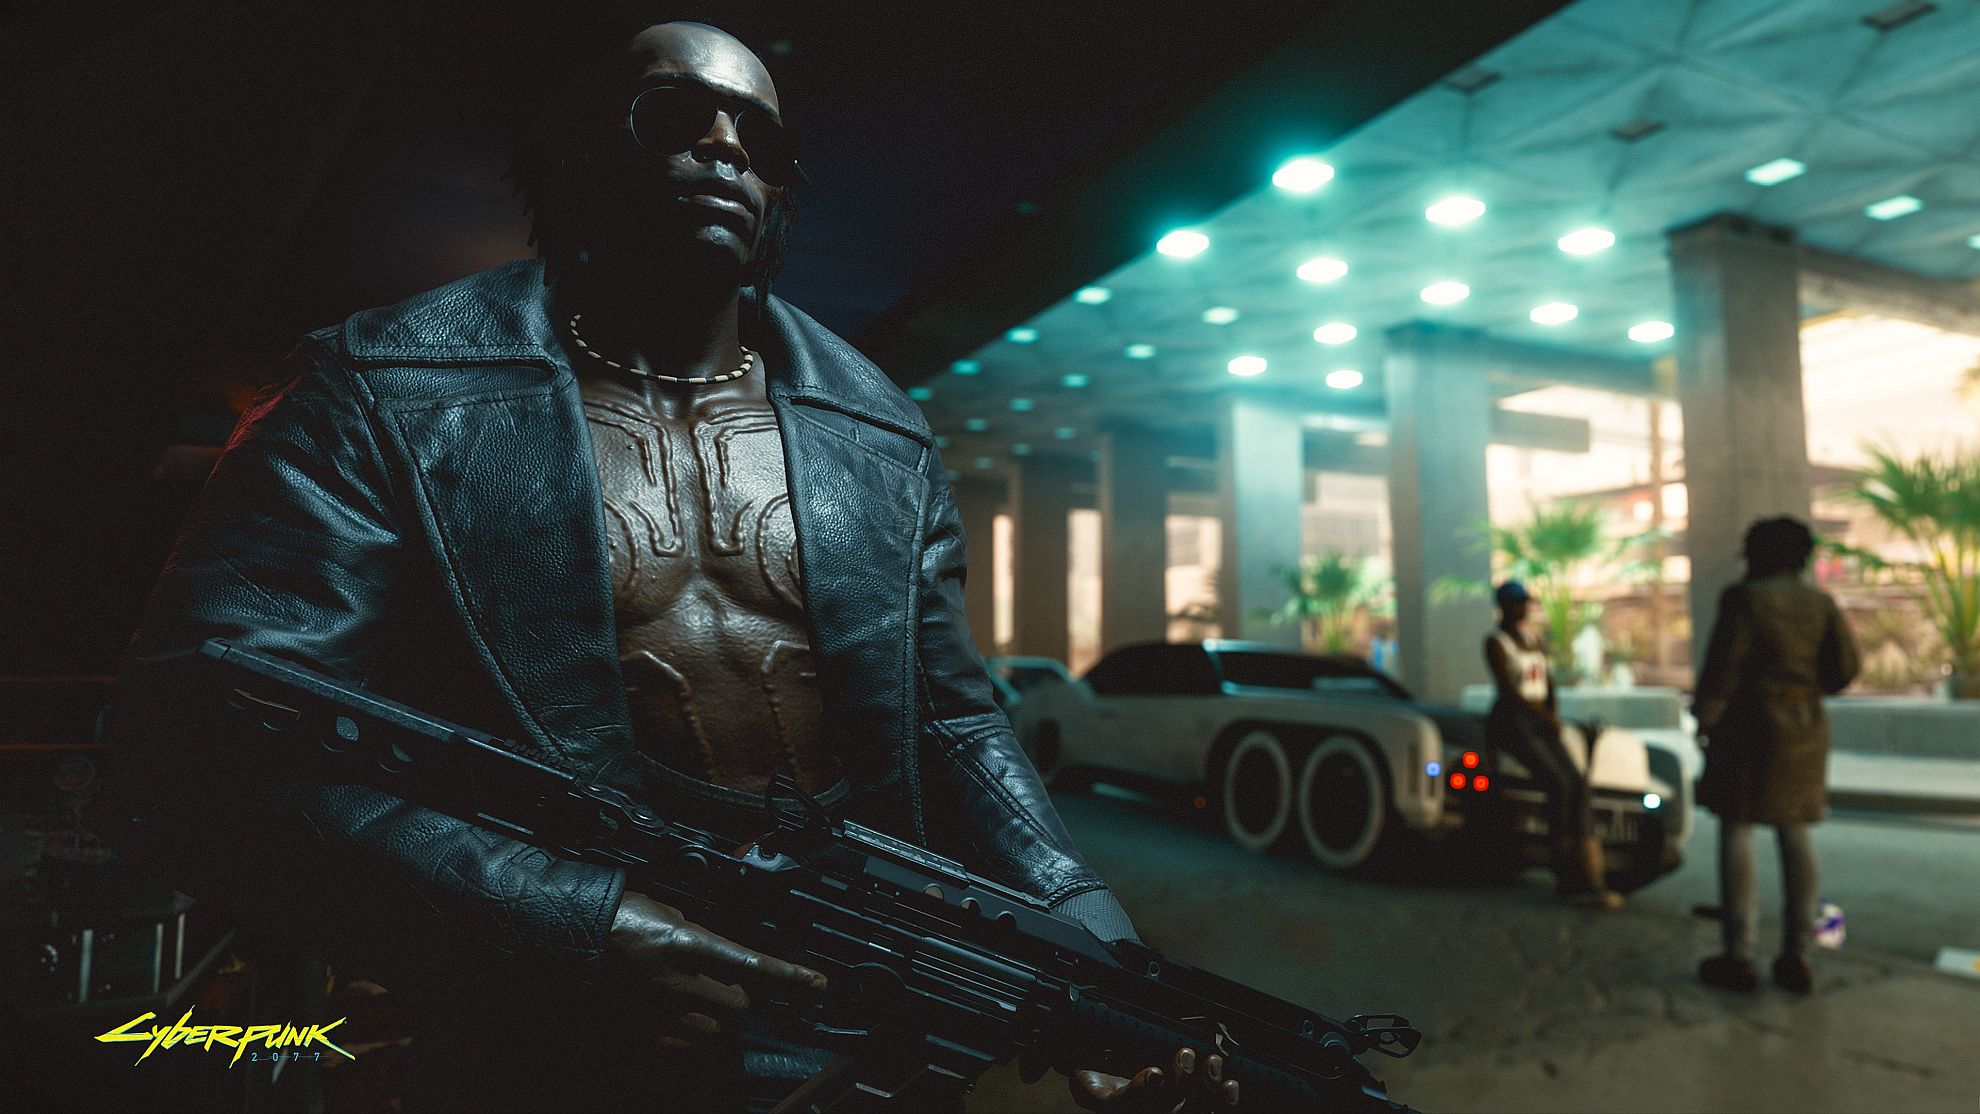 Image for Cyberpunk 2077 and The Witcher 3 won't arrive on PS5 or Xbox Series X/S until next year